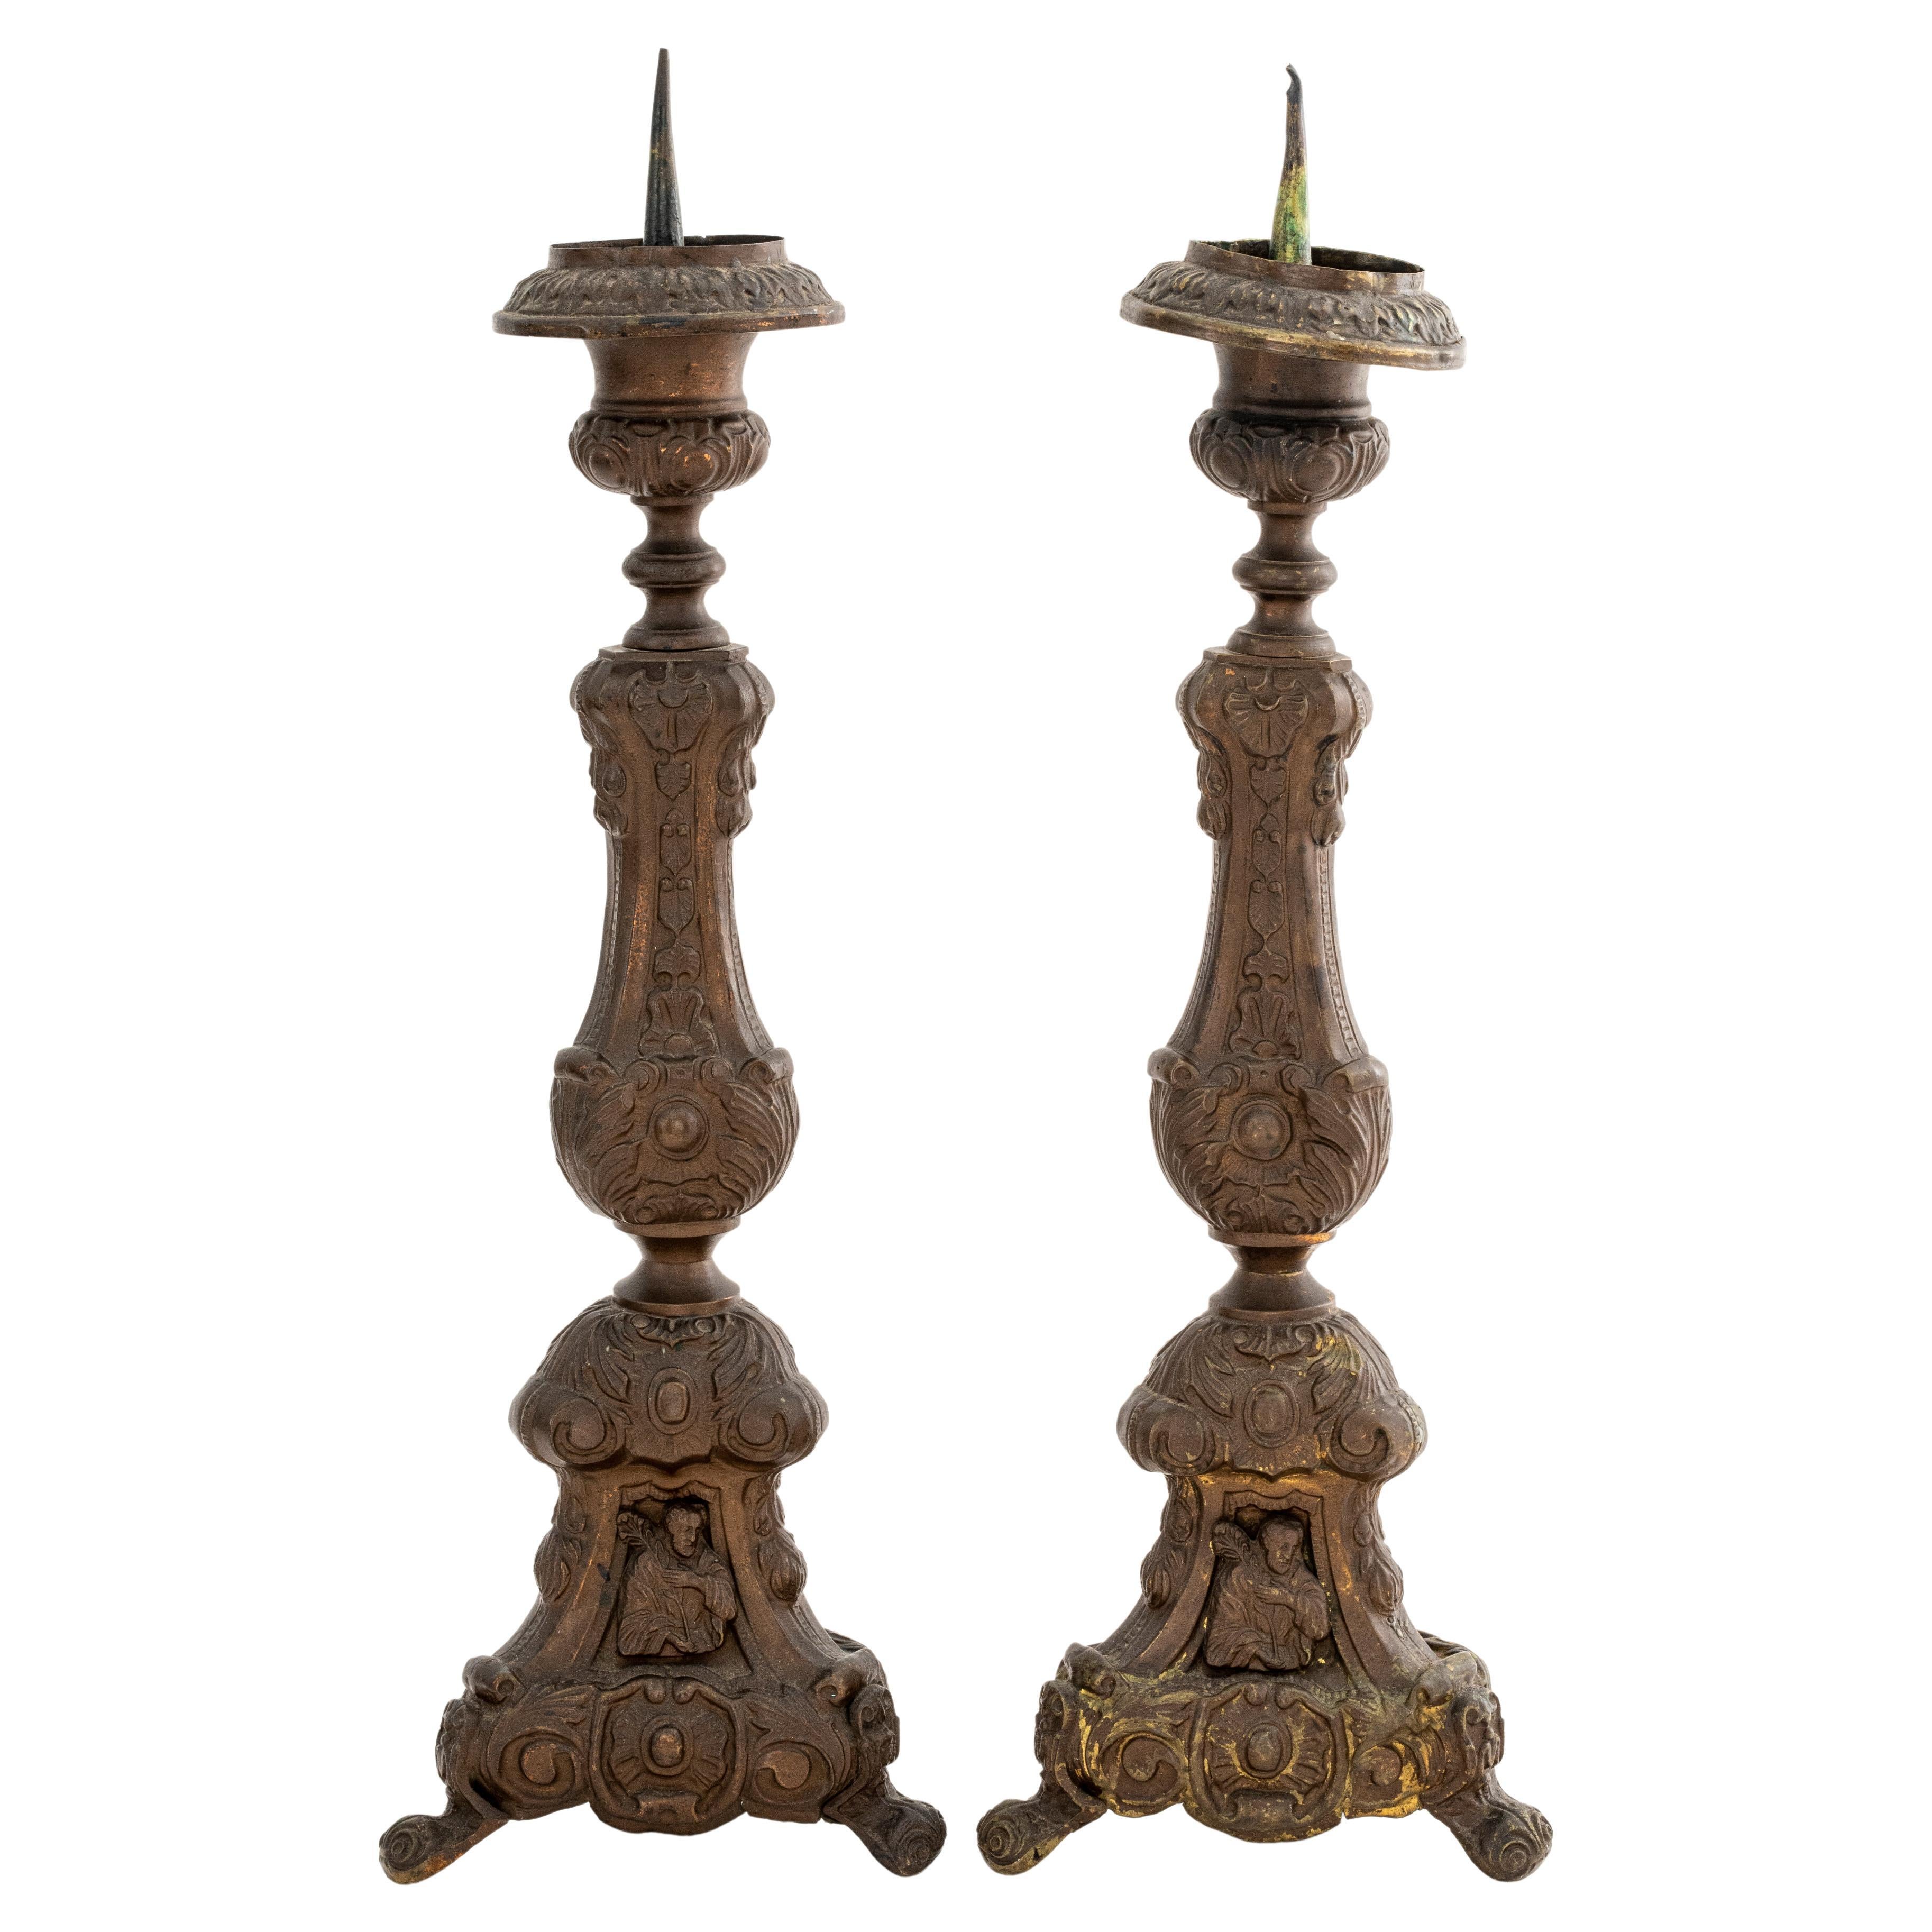 Pair of Baroque Revival Repousse Brass Candle Pricks